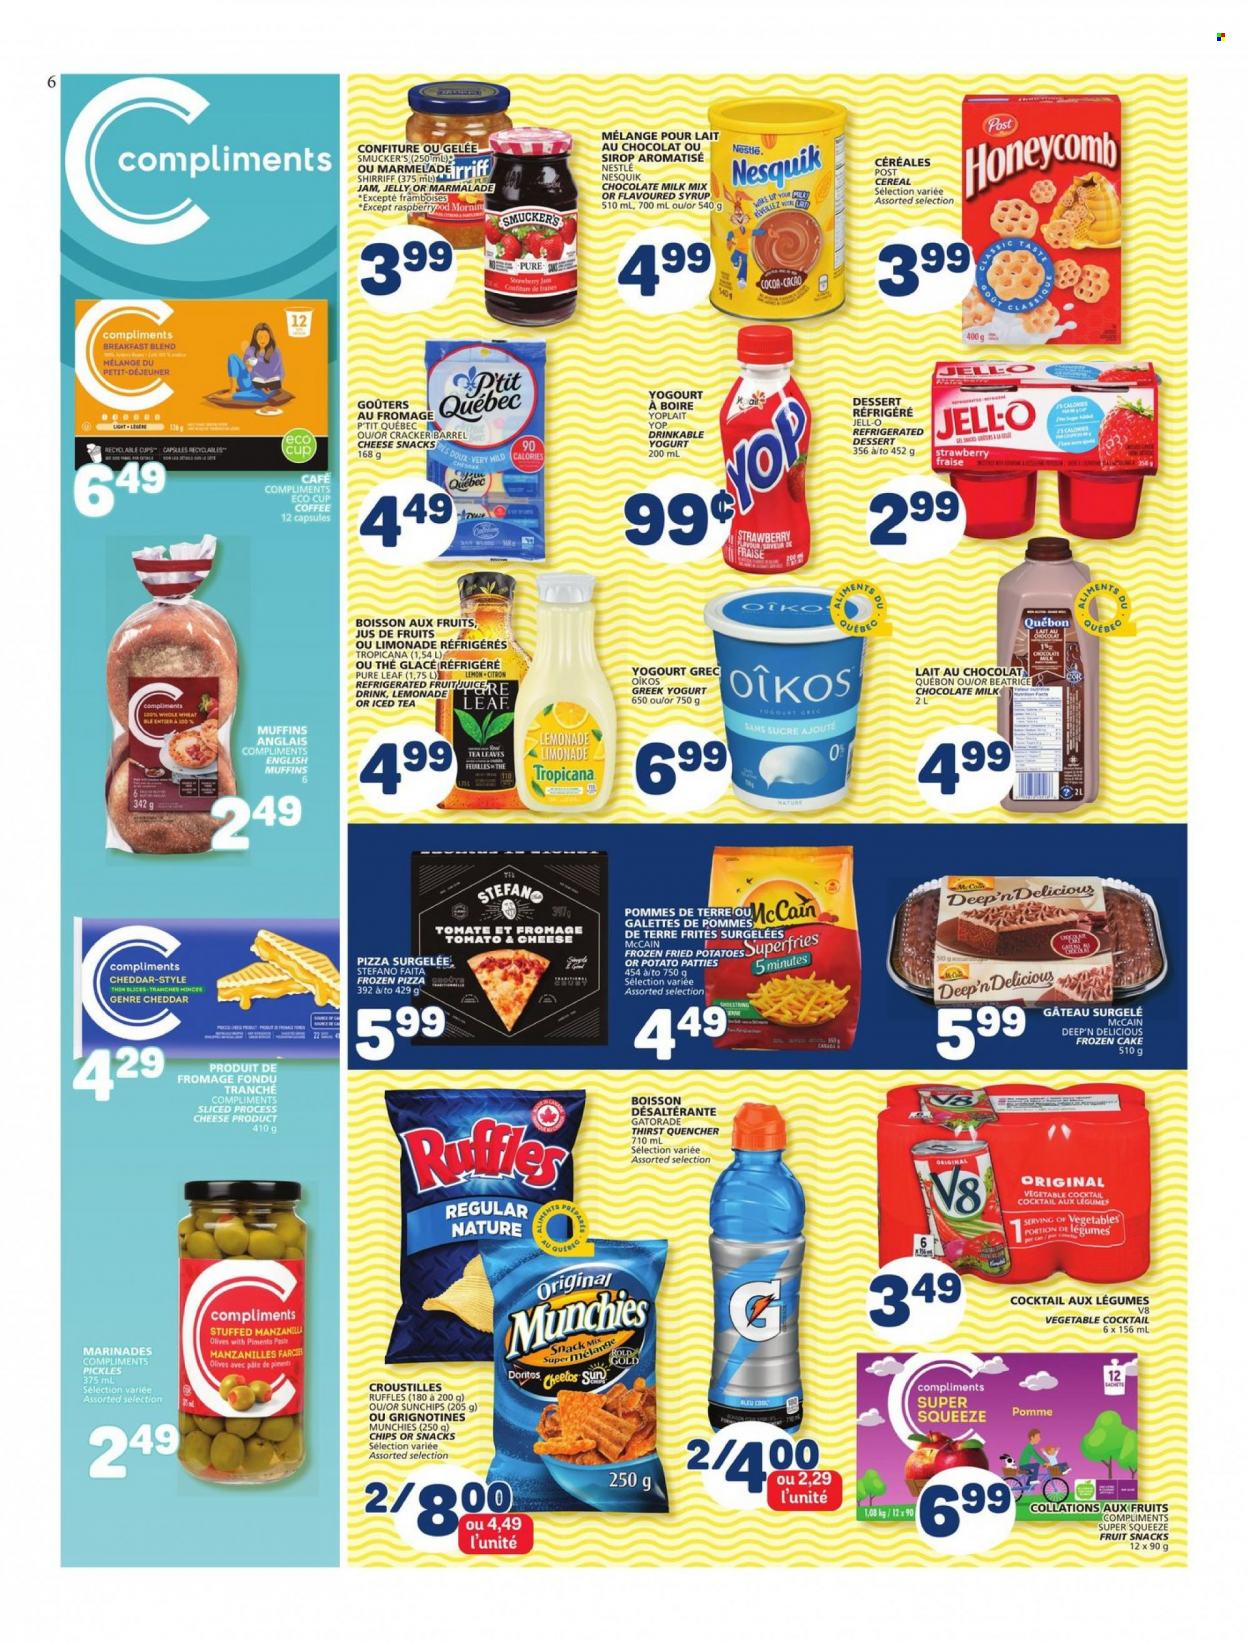 thumbnail - Marché Bonichoix Flyer - March 16, 2023 - March 22, 2023 - Sales products - english muffins, cake, pizza, greek yoghurt, yoghurt, Oikos, Yoplait, milk, McCain, frozen cakes, milk chocolate, jelly, crackers, fruit snack, Doritos, Cheetos, Ruffles, Jell-O, strawberry jam, pickles, cereals, fruit jam, syrup, lemonade, ice tea, Gatorade, Pure Leaf, coffee, breakfast blend, Nestlé, olives, Nesquik. Page 6.